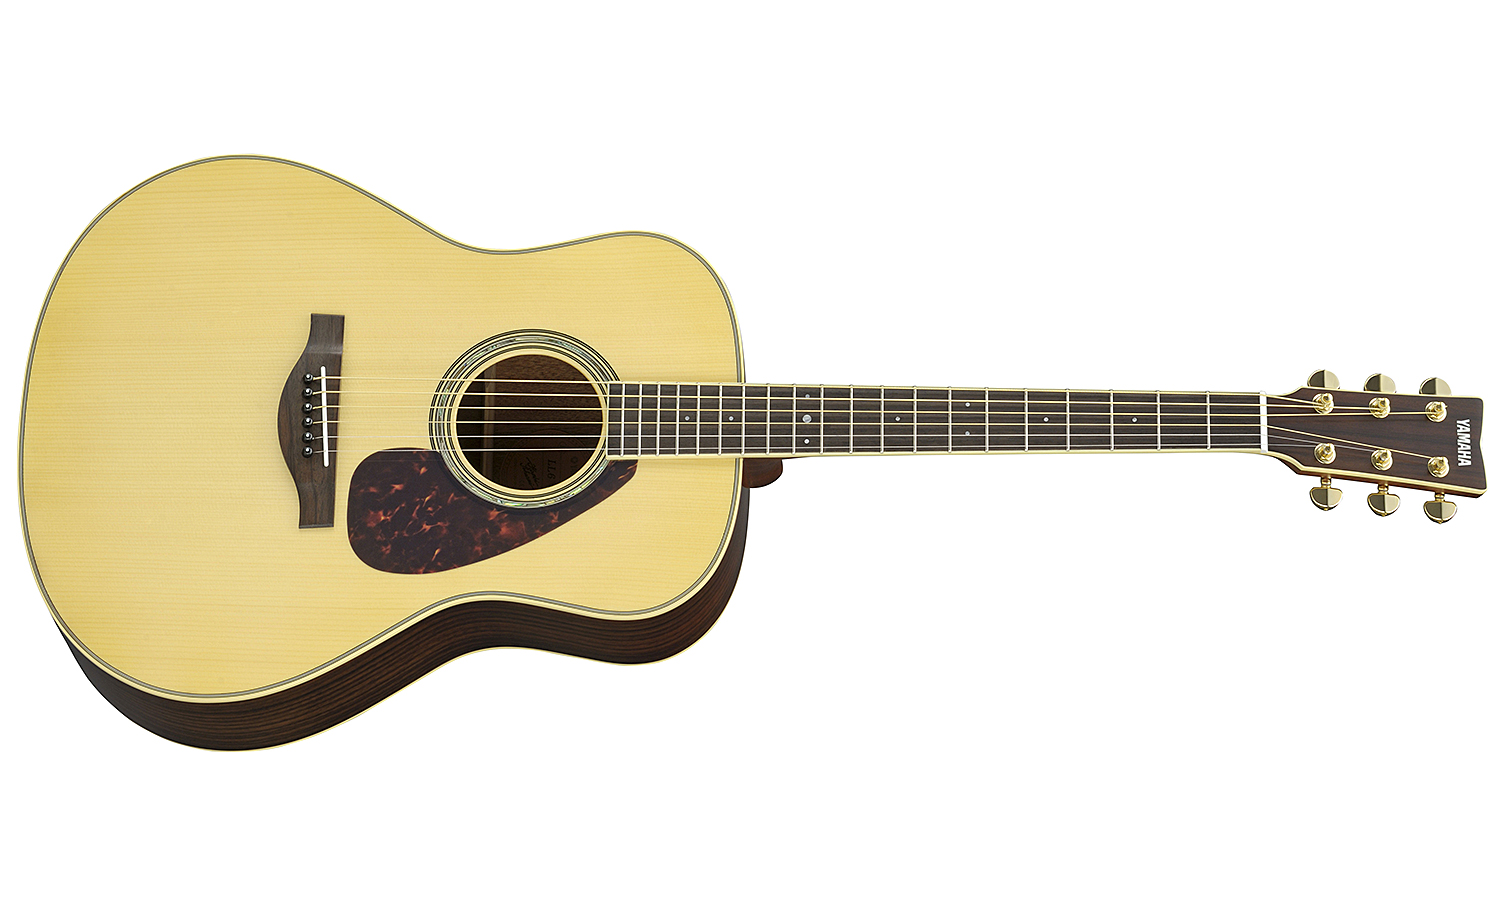 Yamaha Ll6 Are Jumbo Epicea Palissandre Rw - Natural - Guitare Electro Acoustique - Variation 1